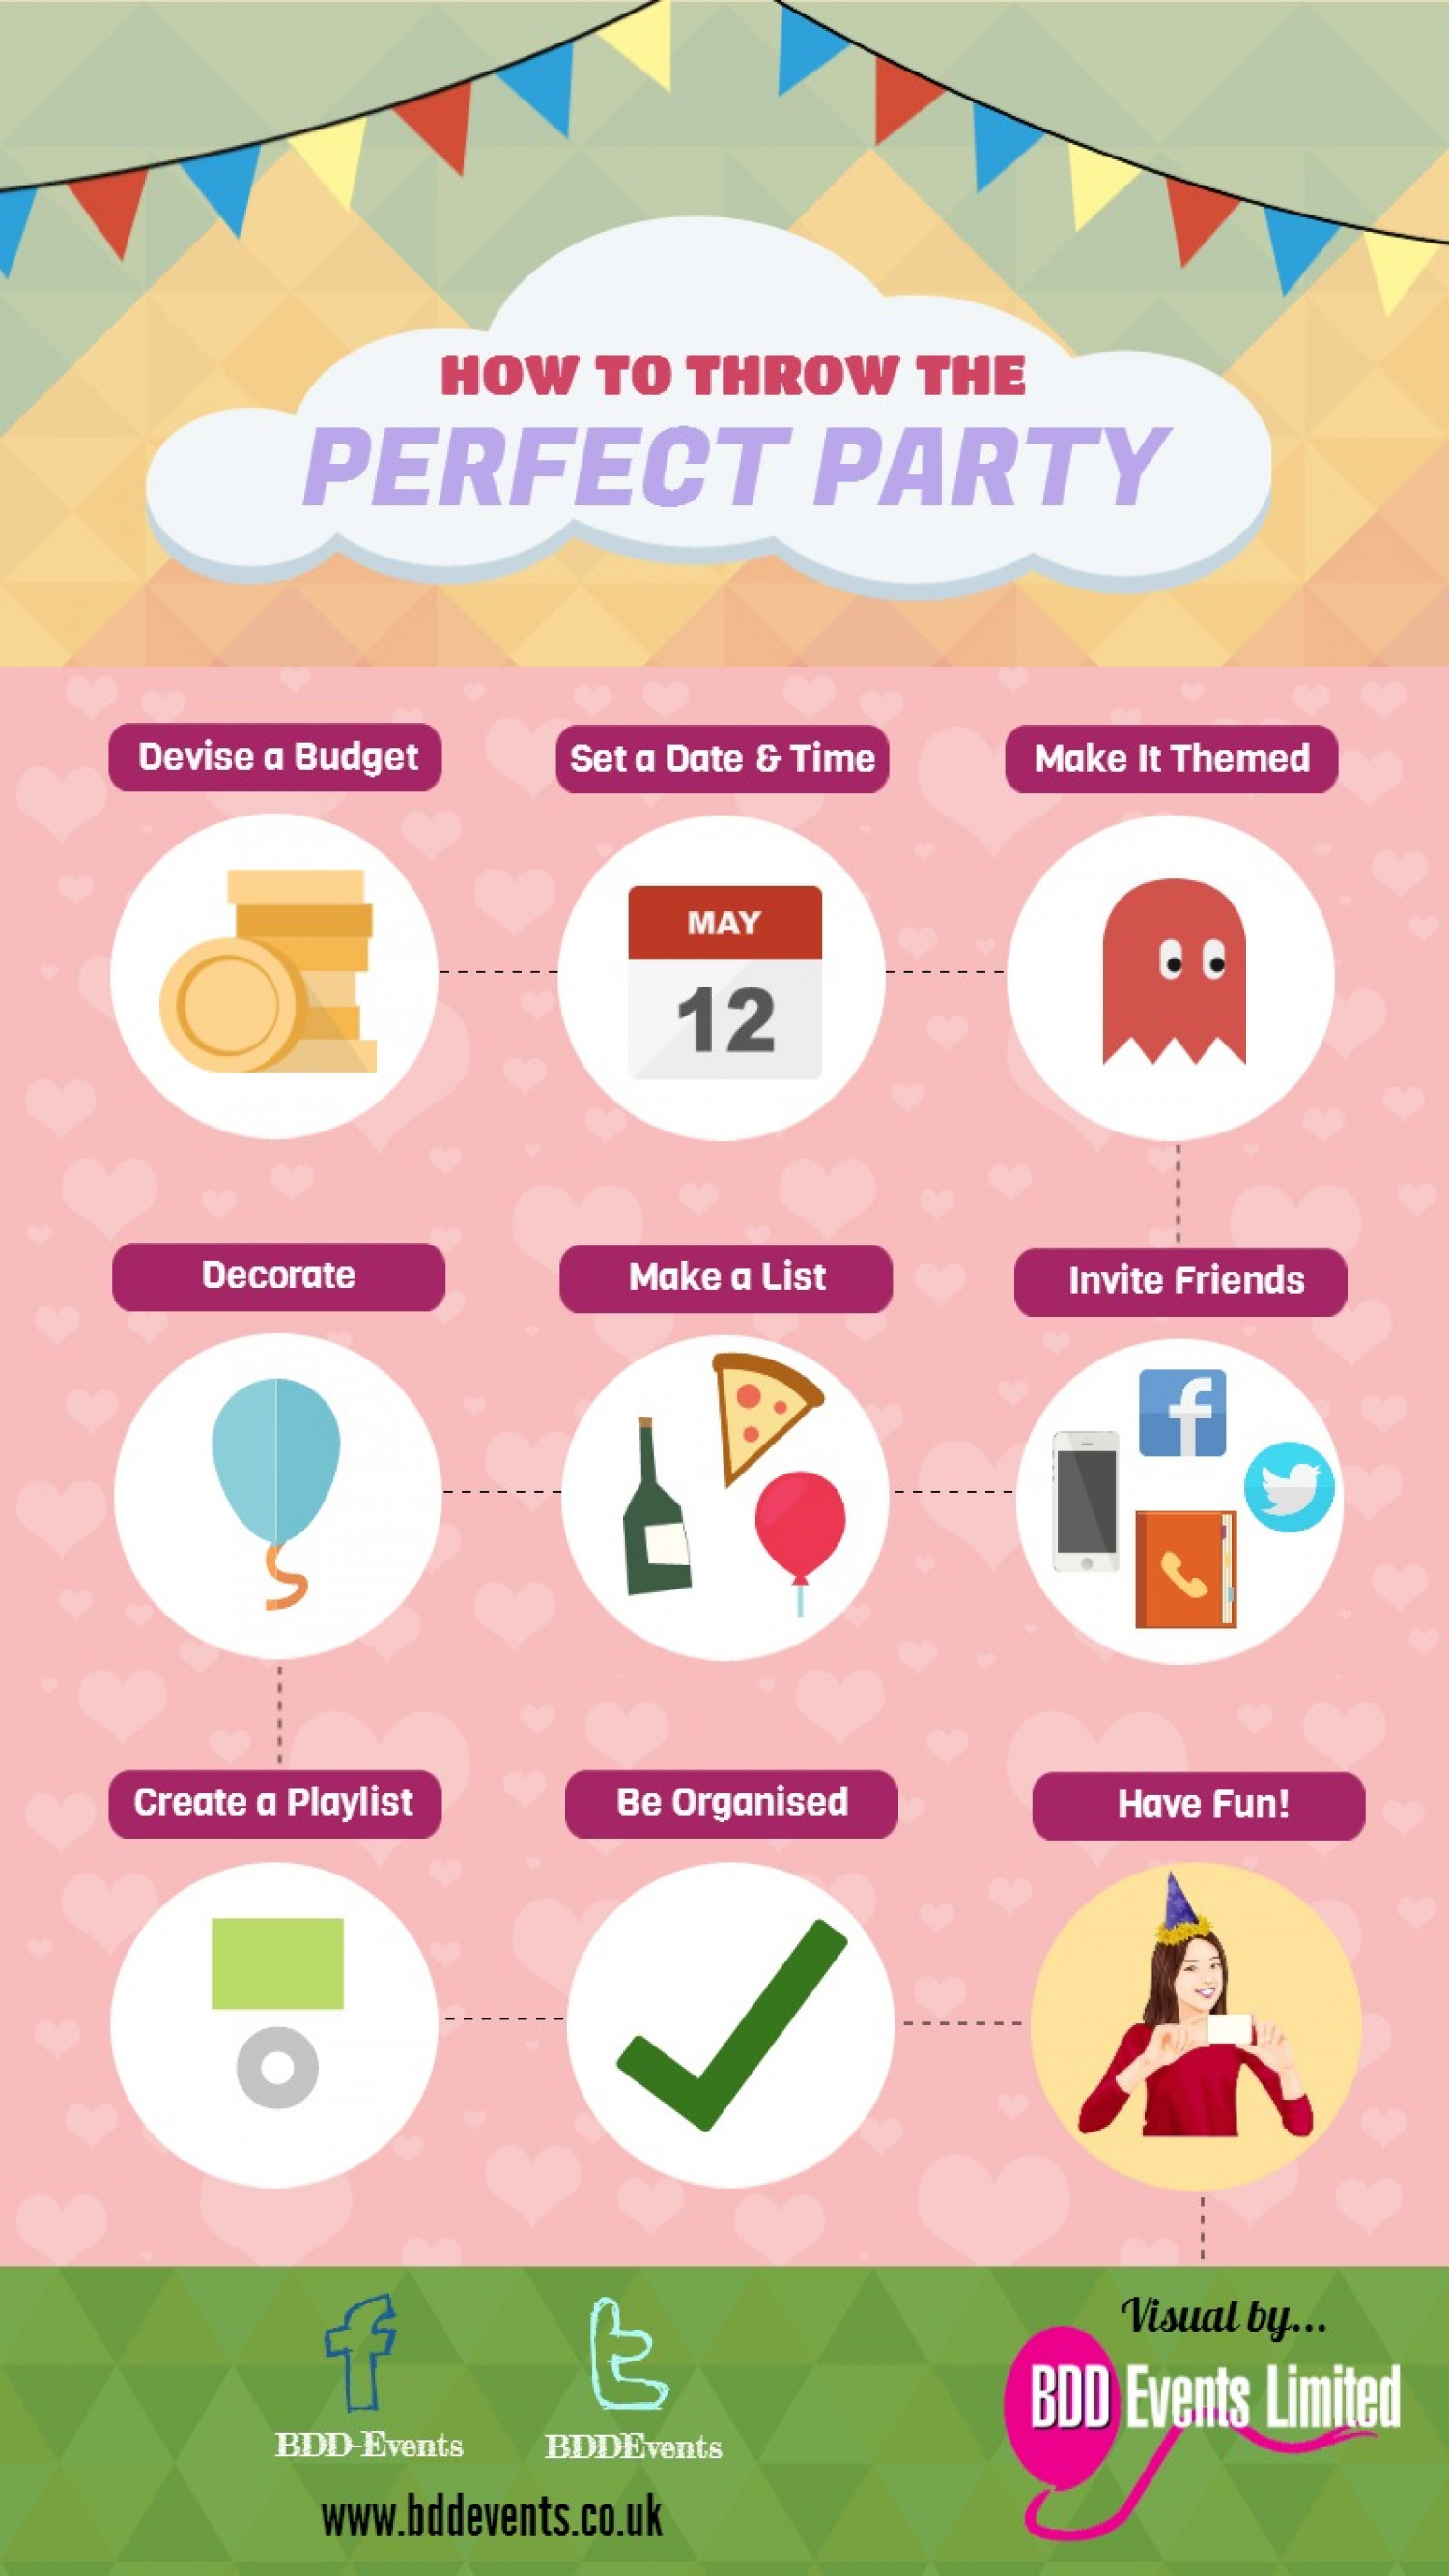 How To Throw The Perfect Party Infographic